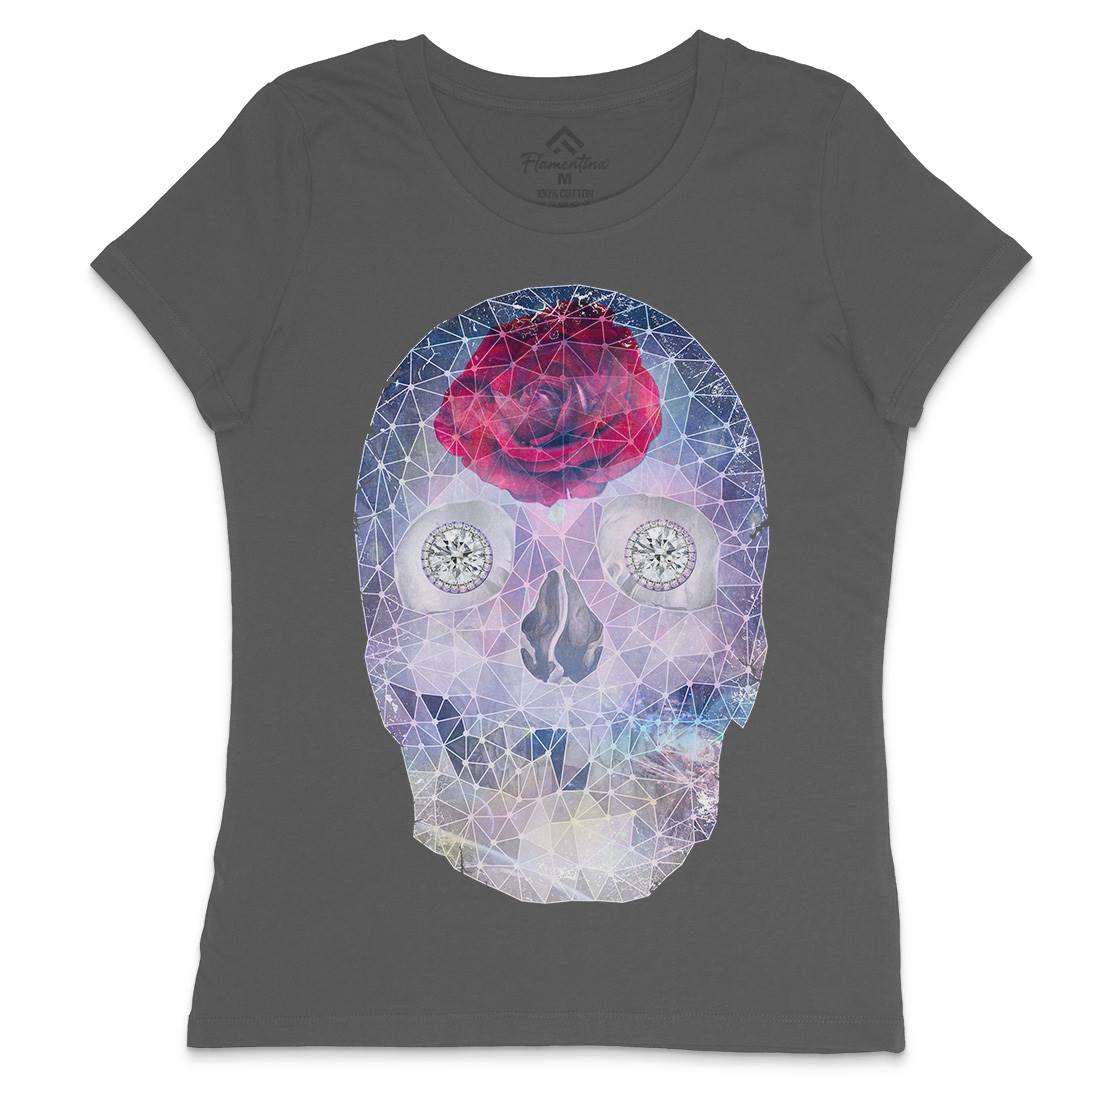 Crystal Skull Womens Crew Neck T-Shirt Space A816